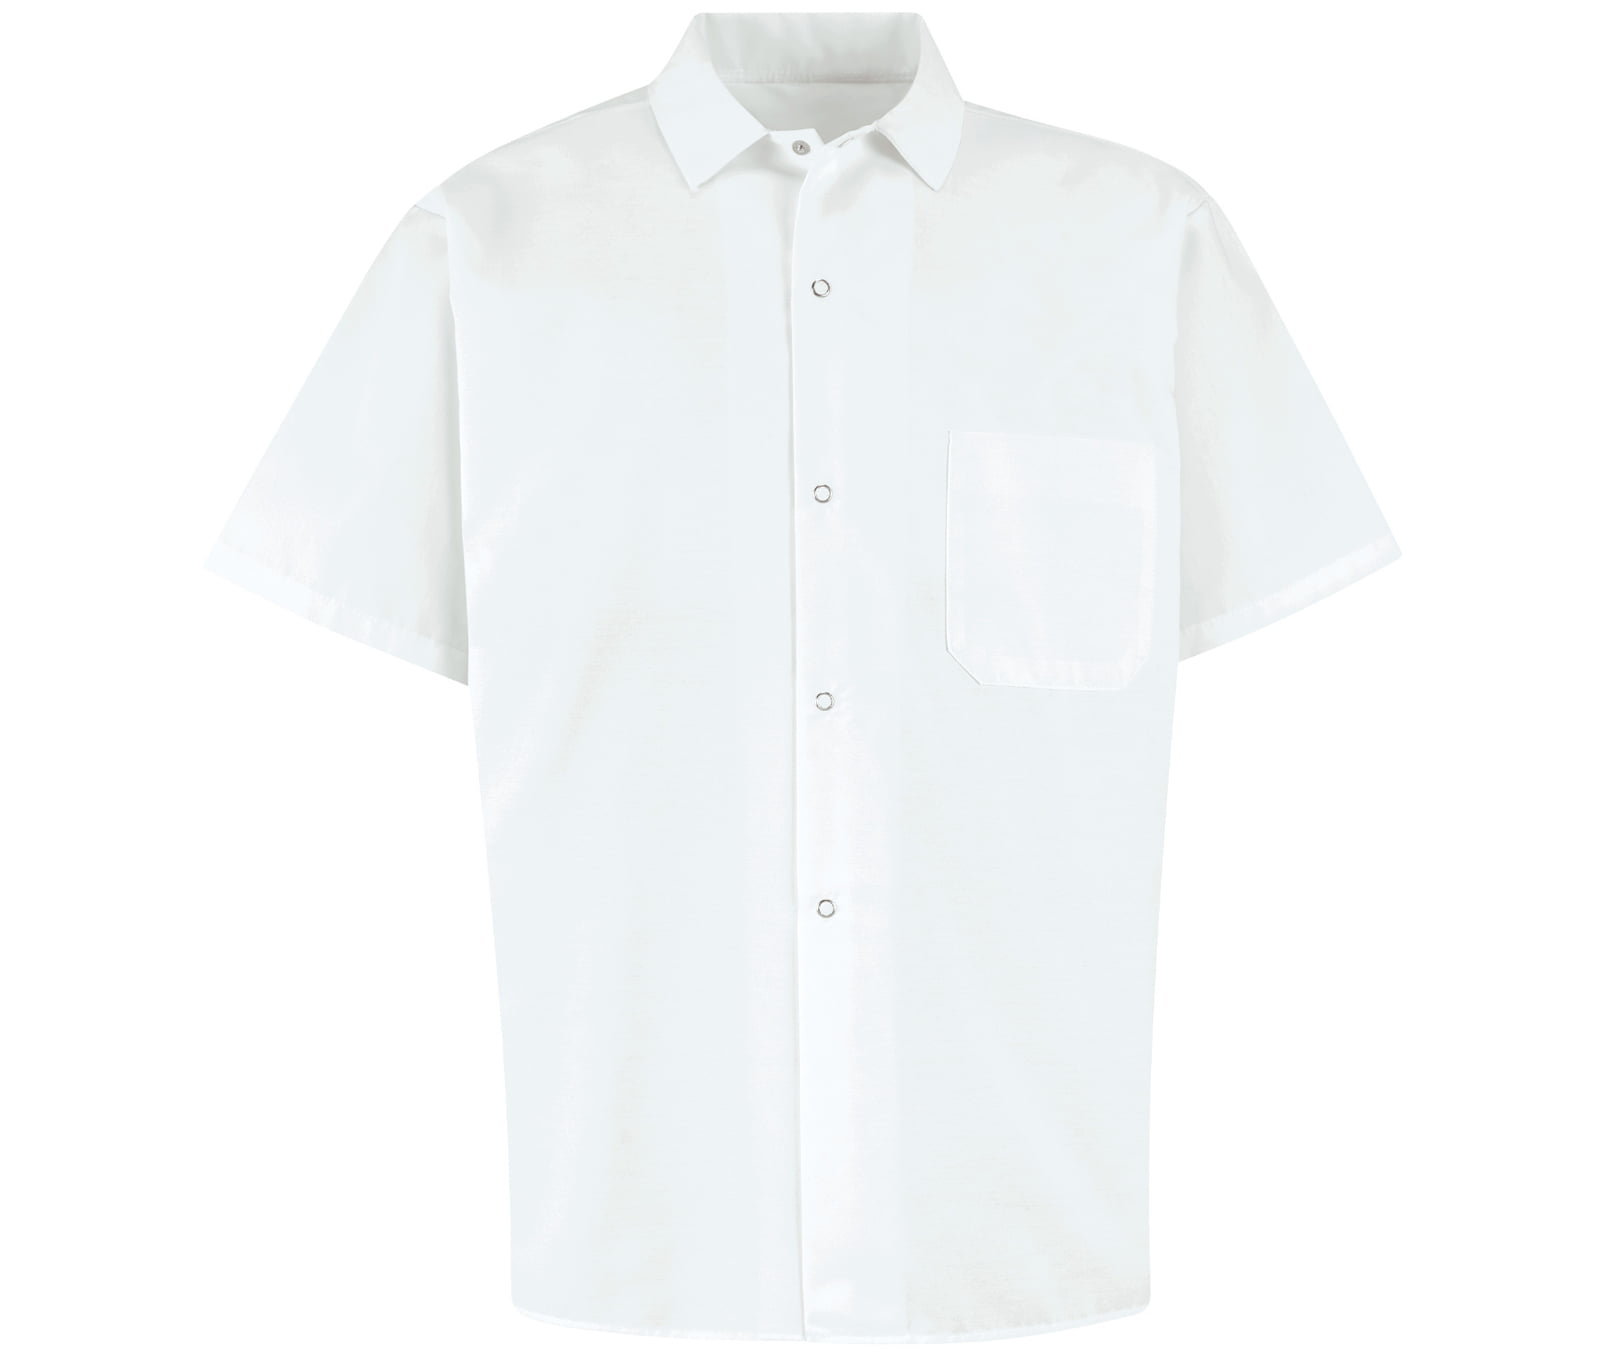 CHEF CODE Multi-purpose Work Shirt Short Sleeves With Snap Buttons XS-5XL CC125 